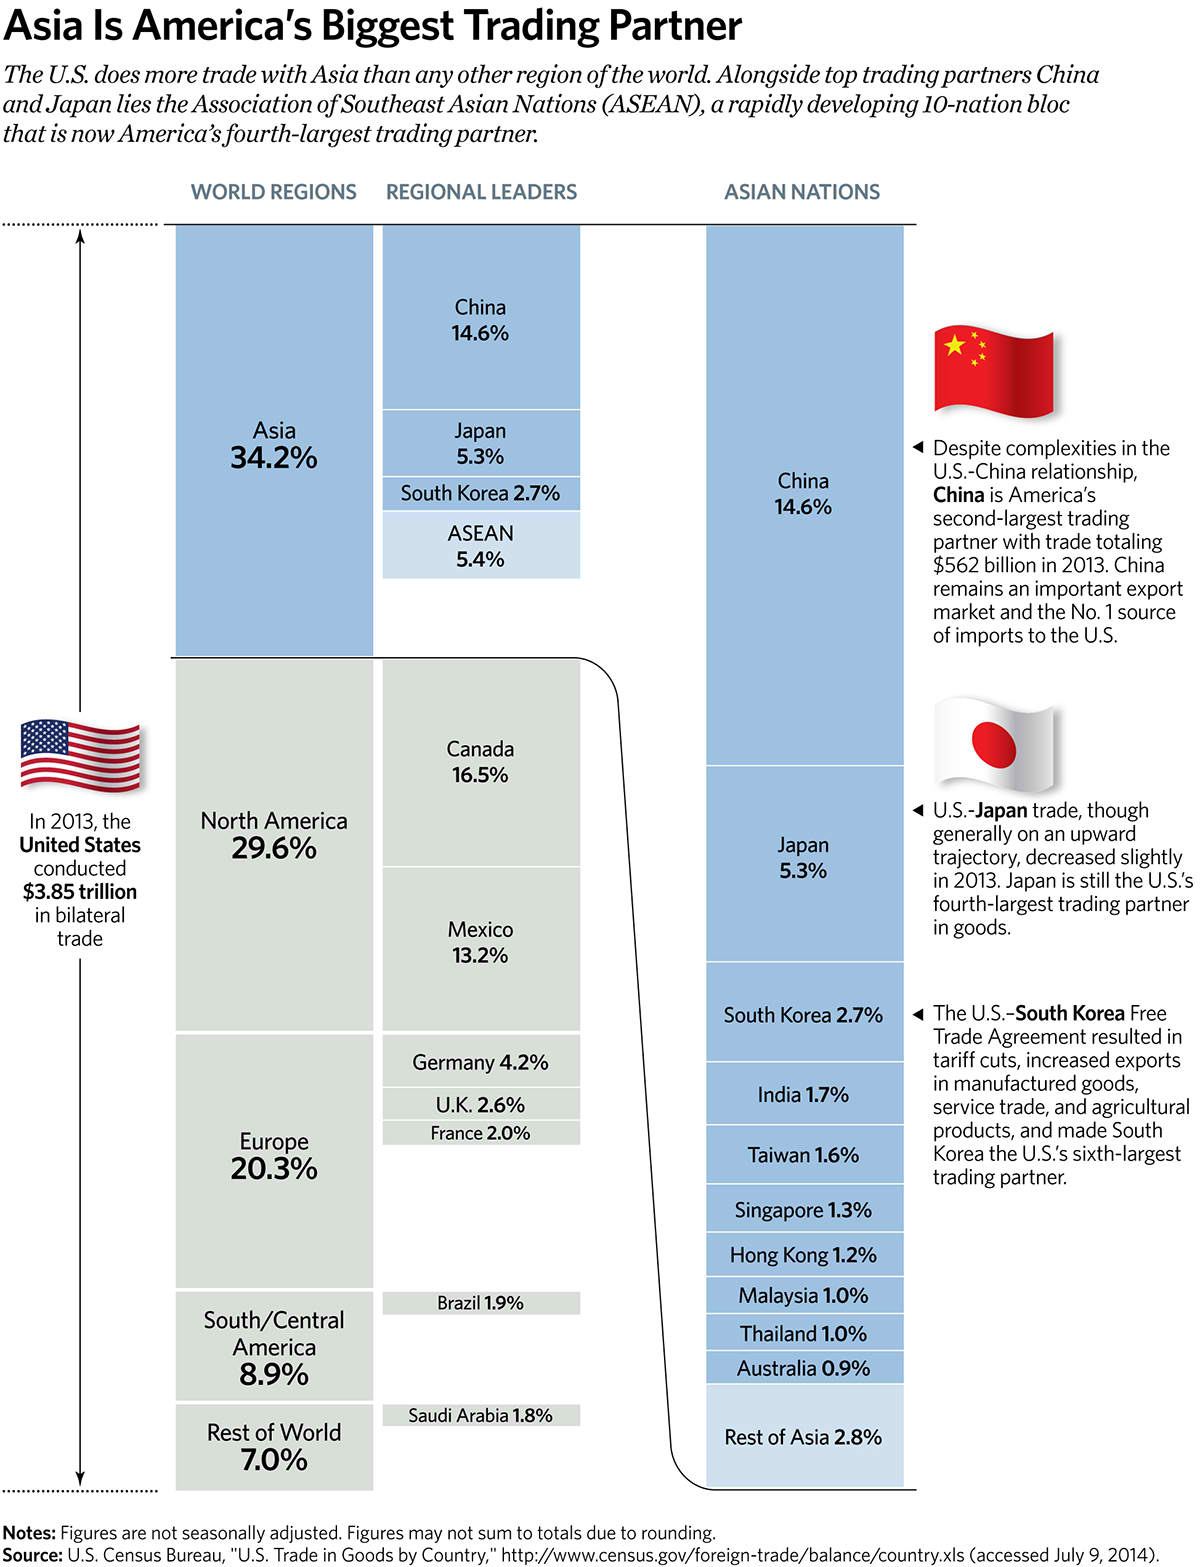 Asia Is America’s Biggest Trading Partner